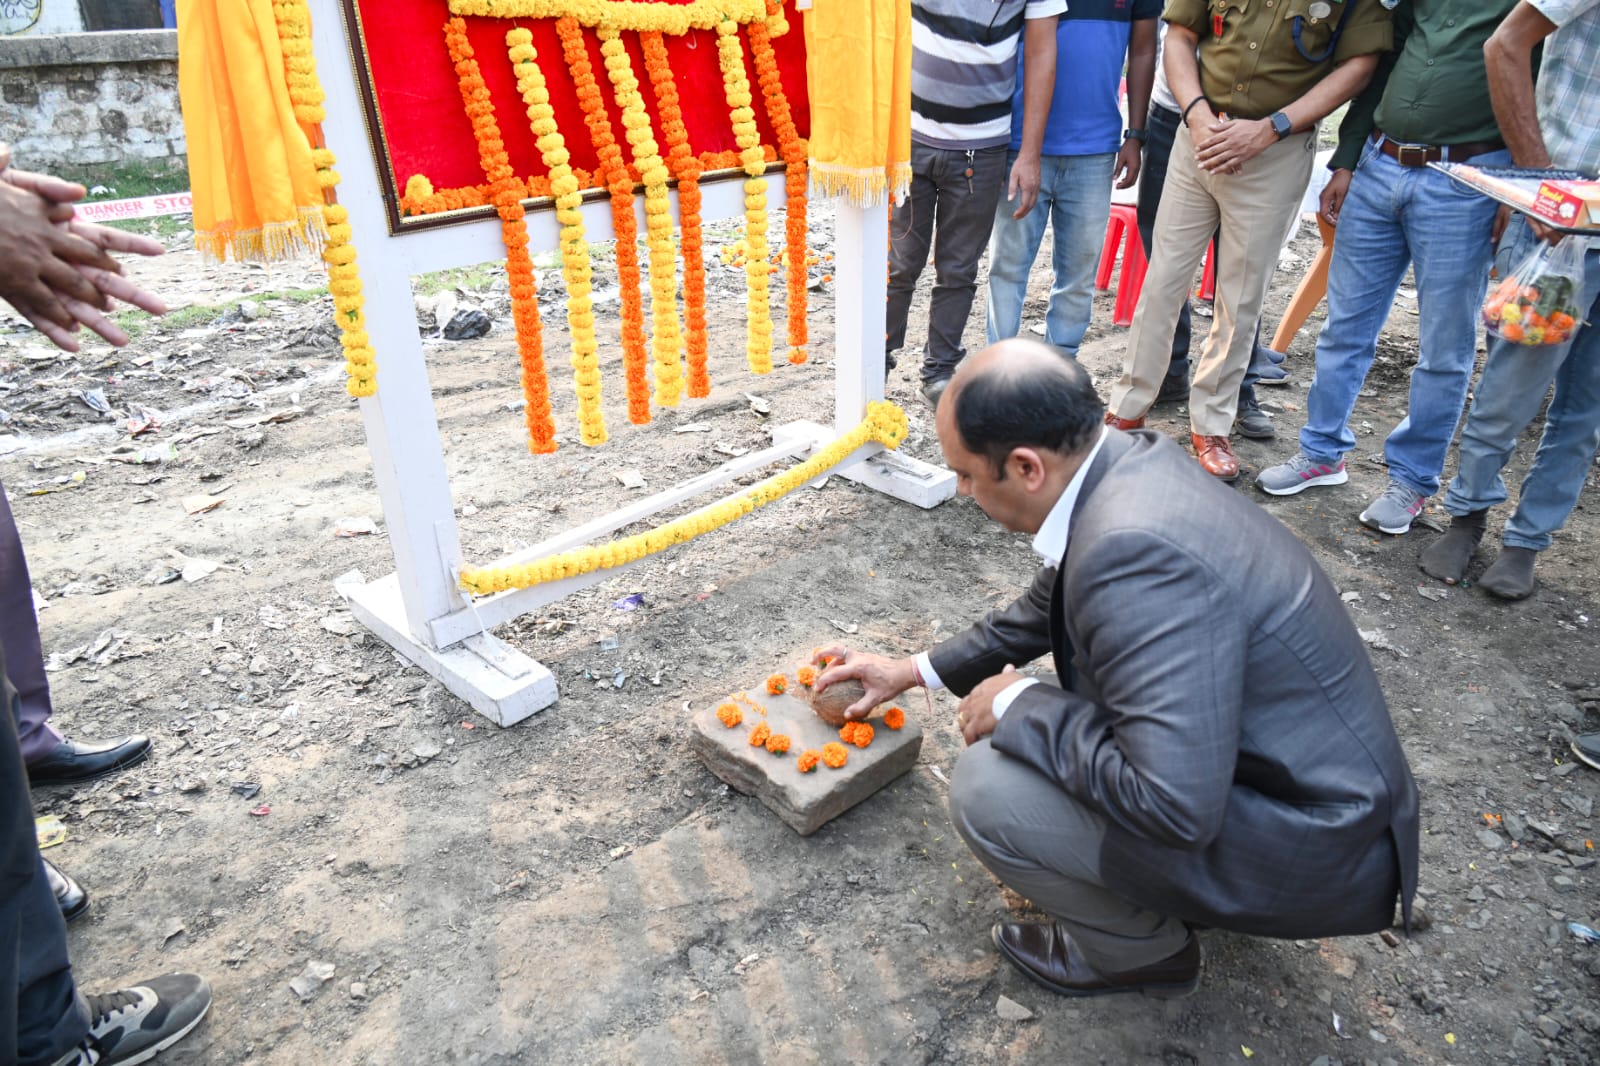 The foundation stone for the construction of a new Railway Protection Force (RPF) office and barrack was laid today at Canning Station by Shri Deepak Nigam , Divisional Railway Manager (DRM), Sealdah Division, Eastern Railway.